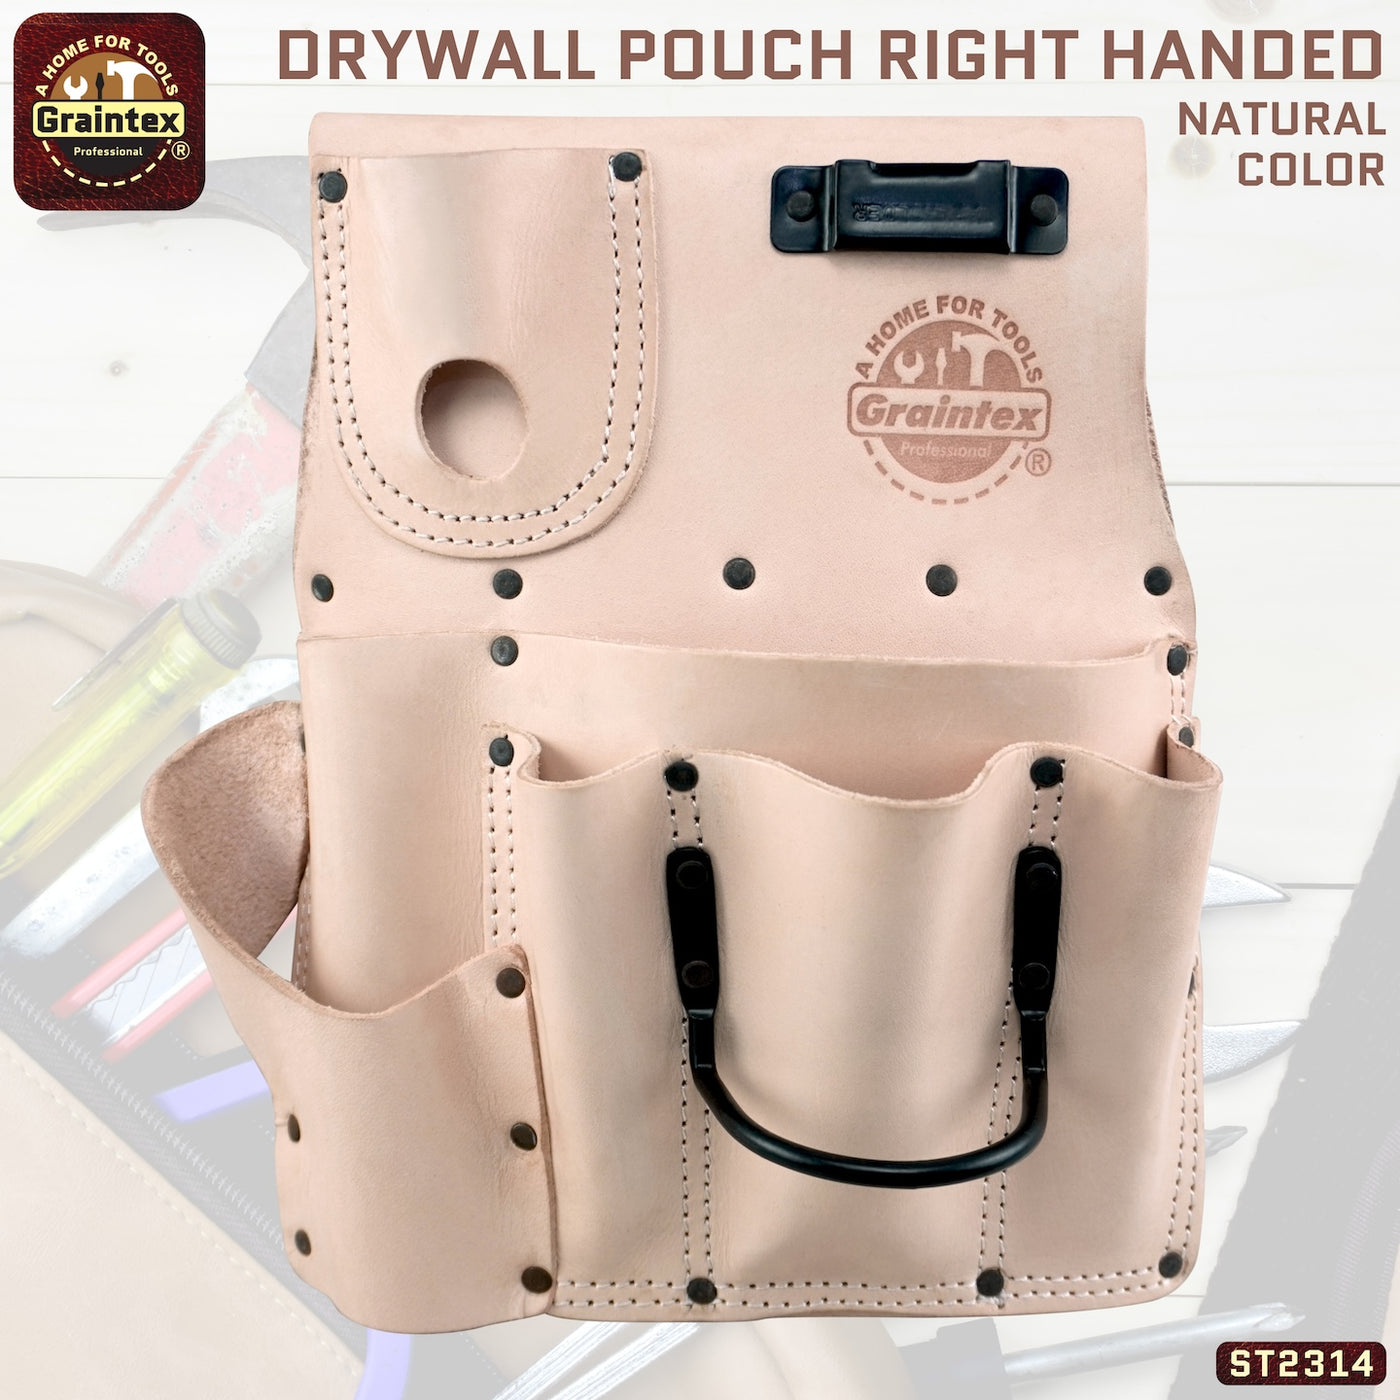 ST2314 :: Drywall Pouch Right Handed Natural Color Top Grain Leather